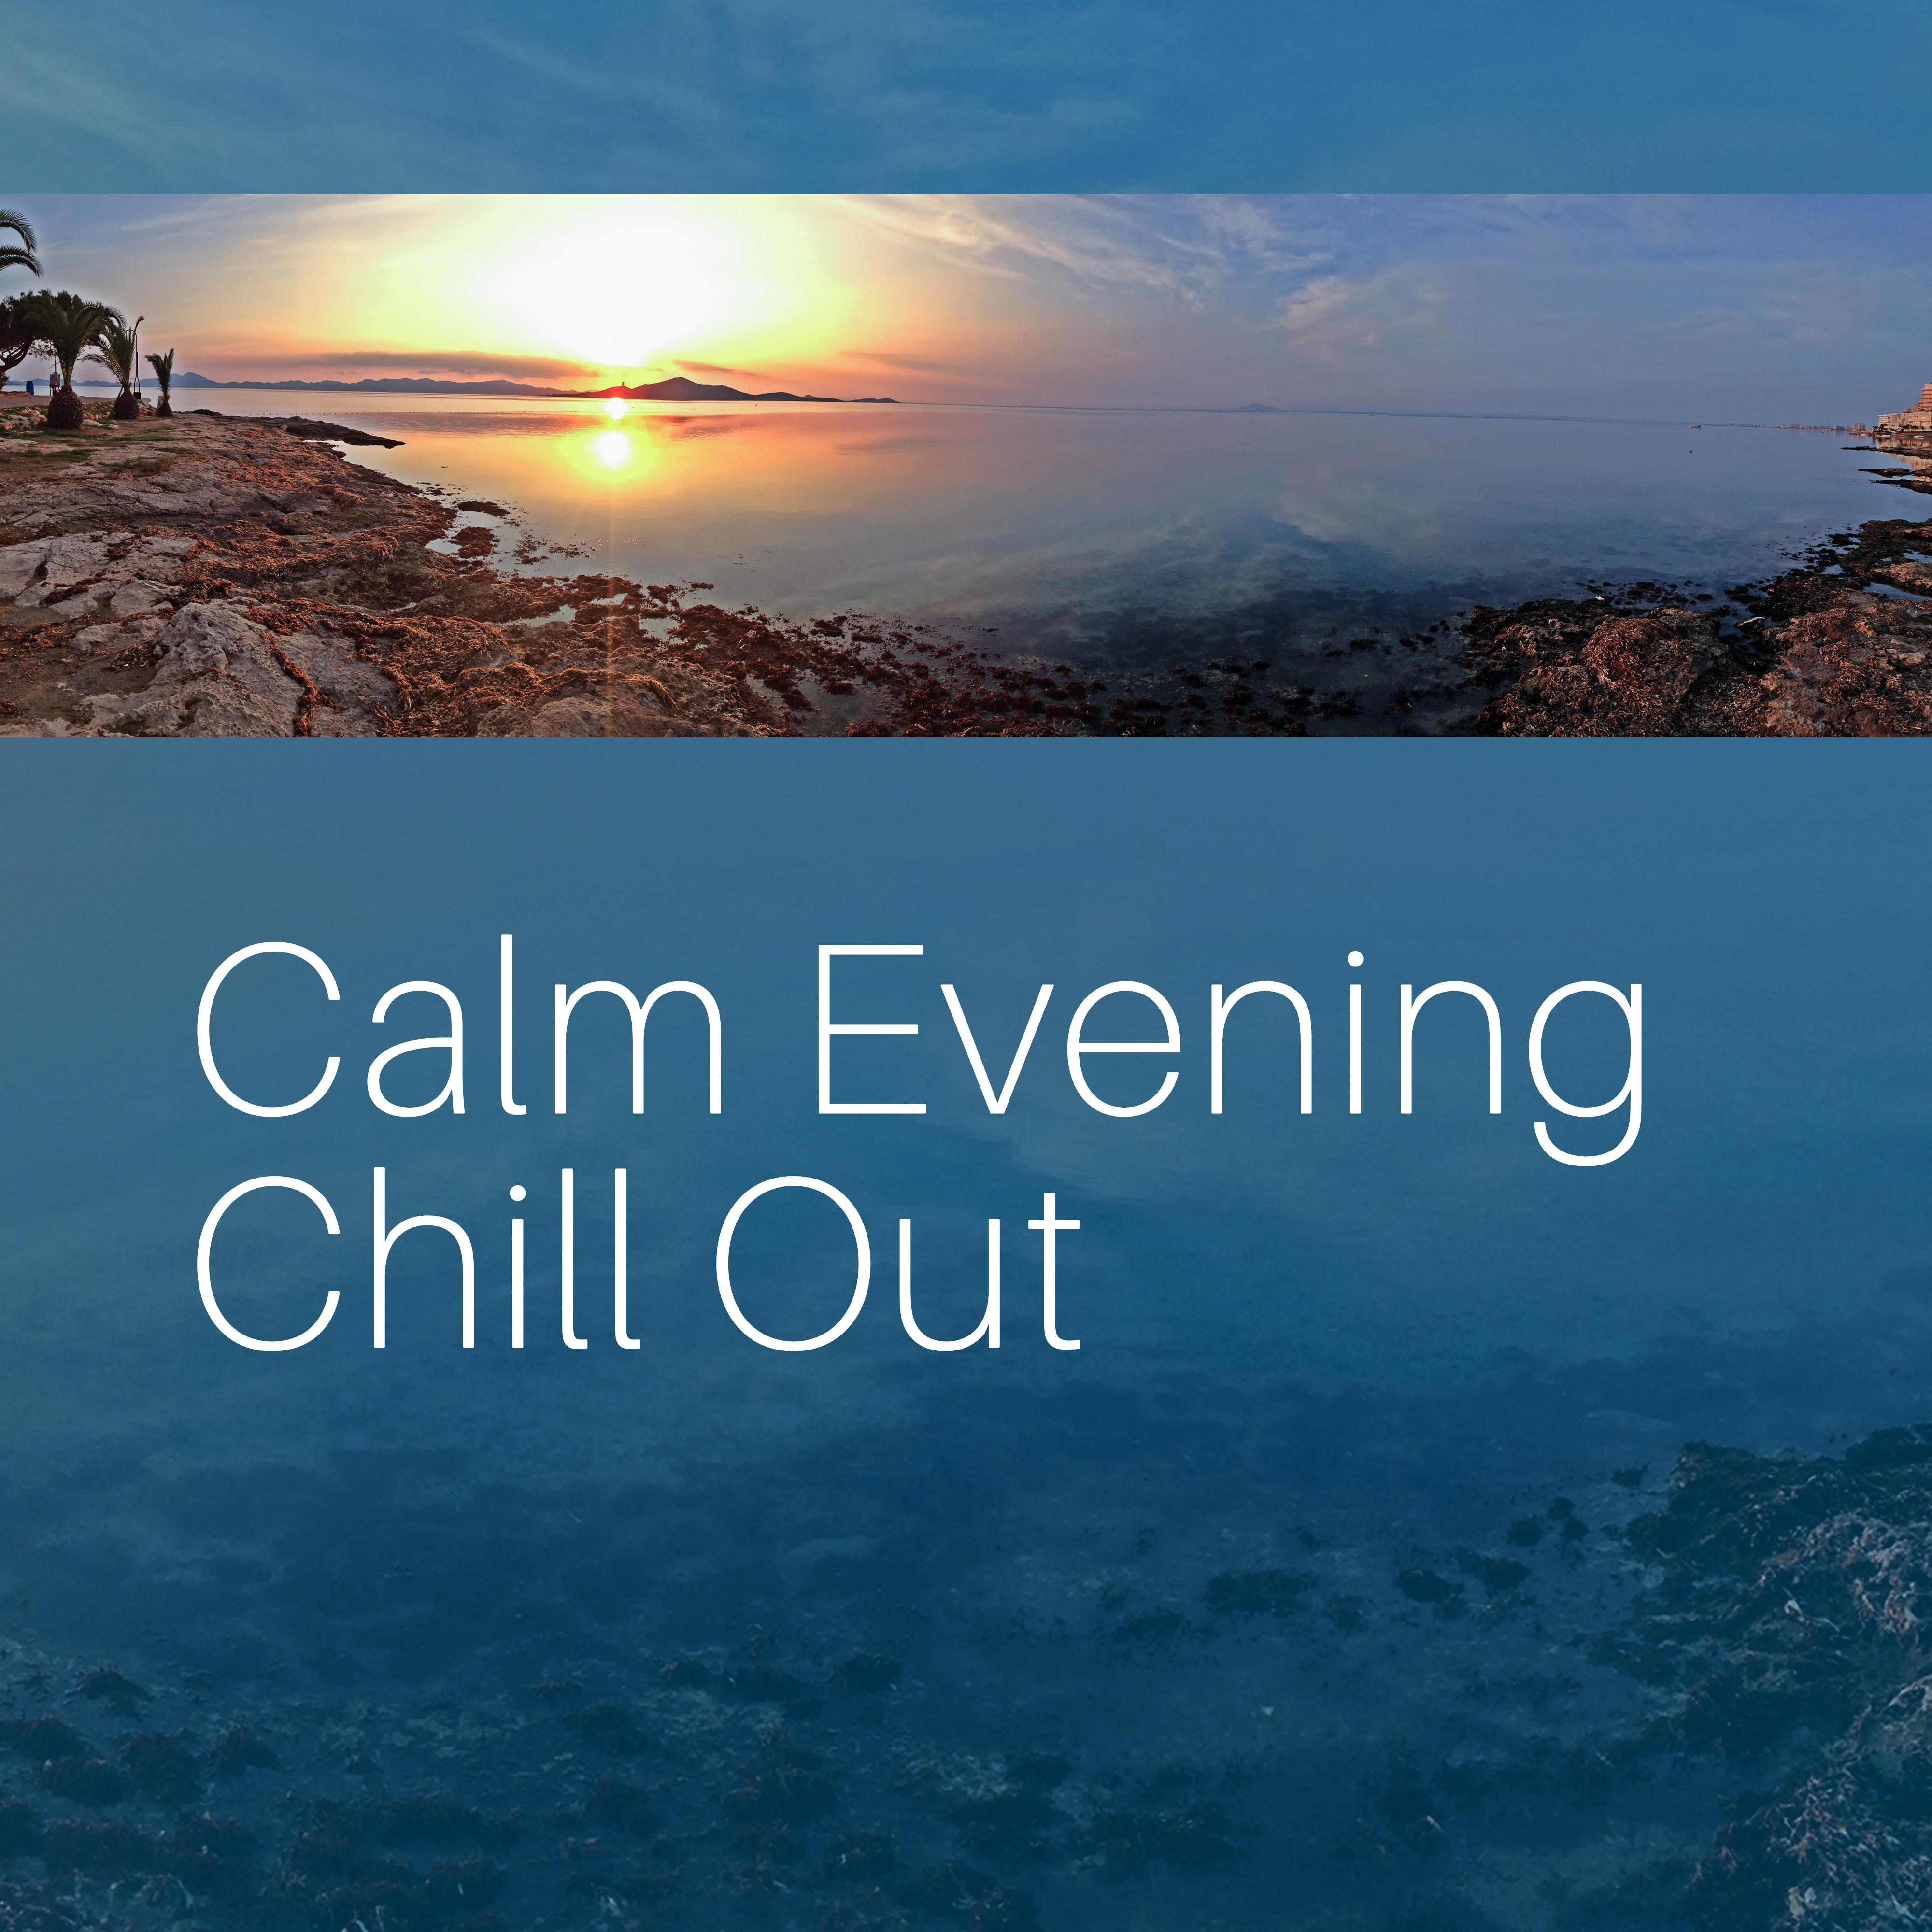 Calm Evening Chill Out  Stress Relief, Night Relaxation, Summer Soft Vibes, Chill a Bit